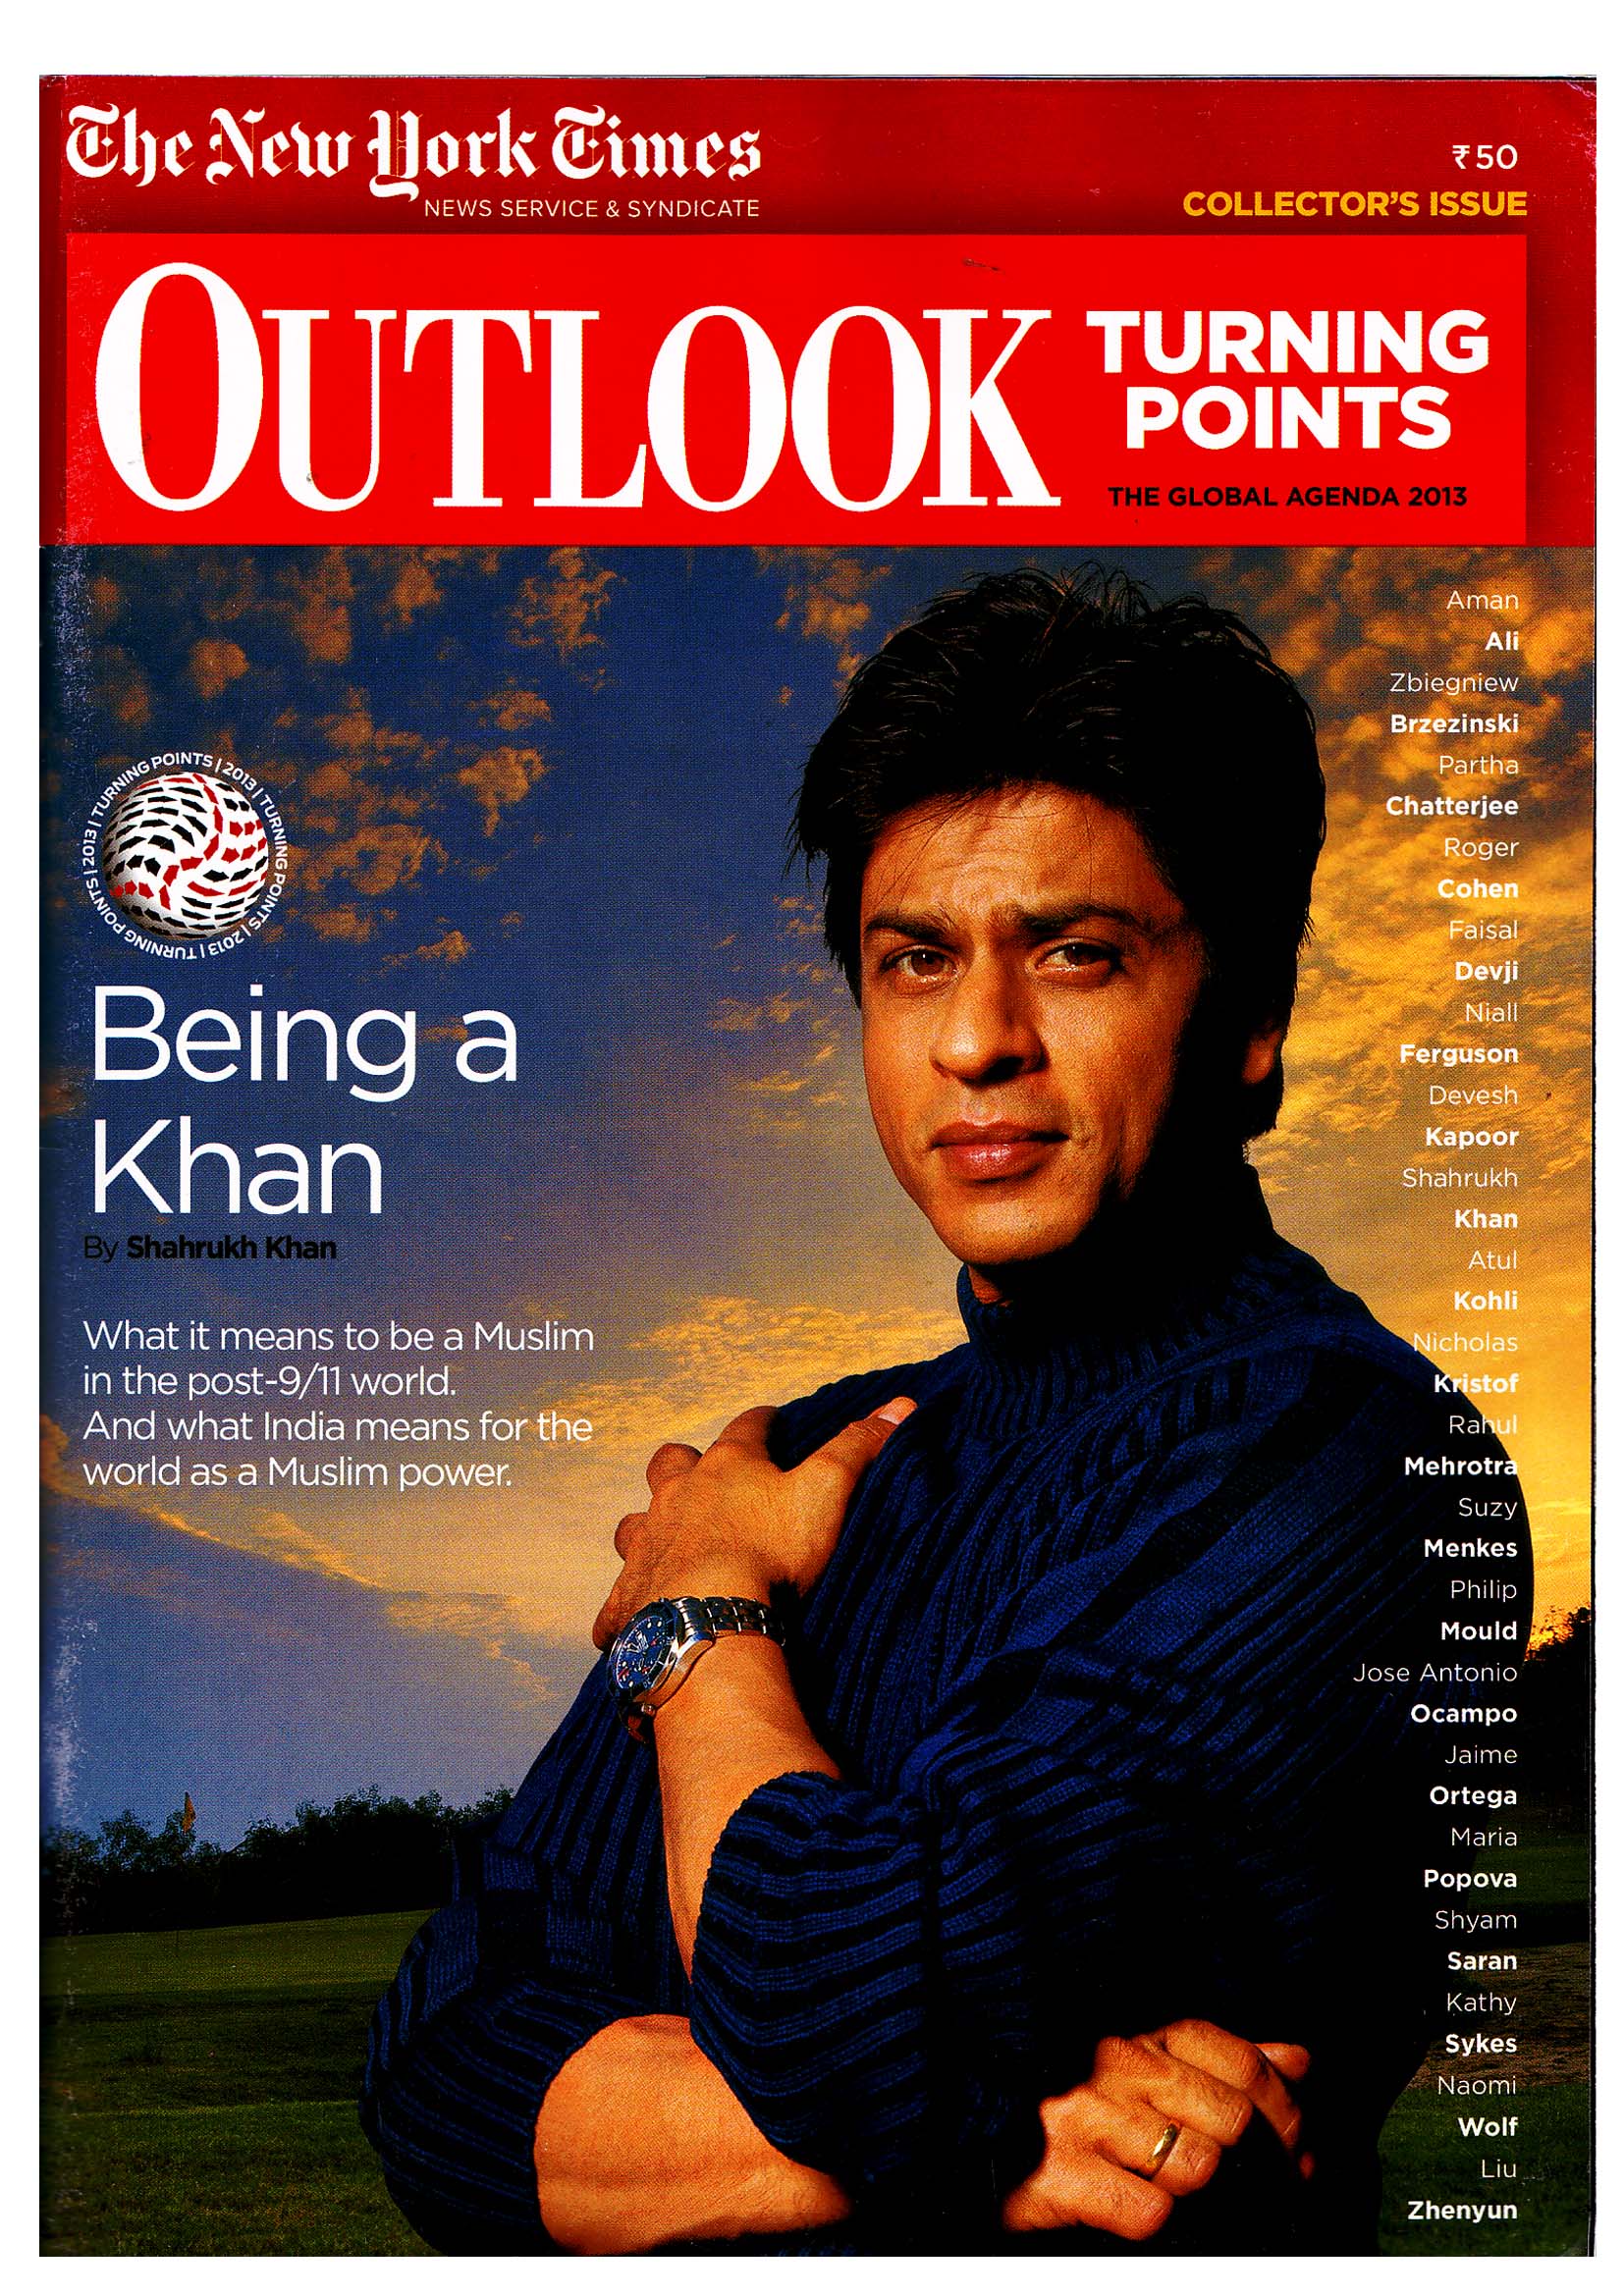 2013 SRK OUTLOOK MAGAZINE  COVER PAGE